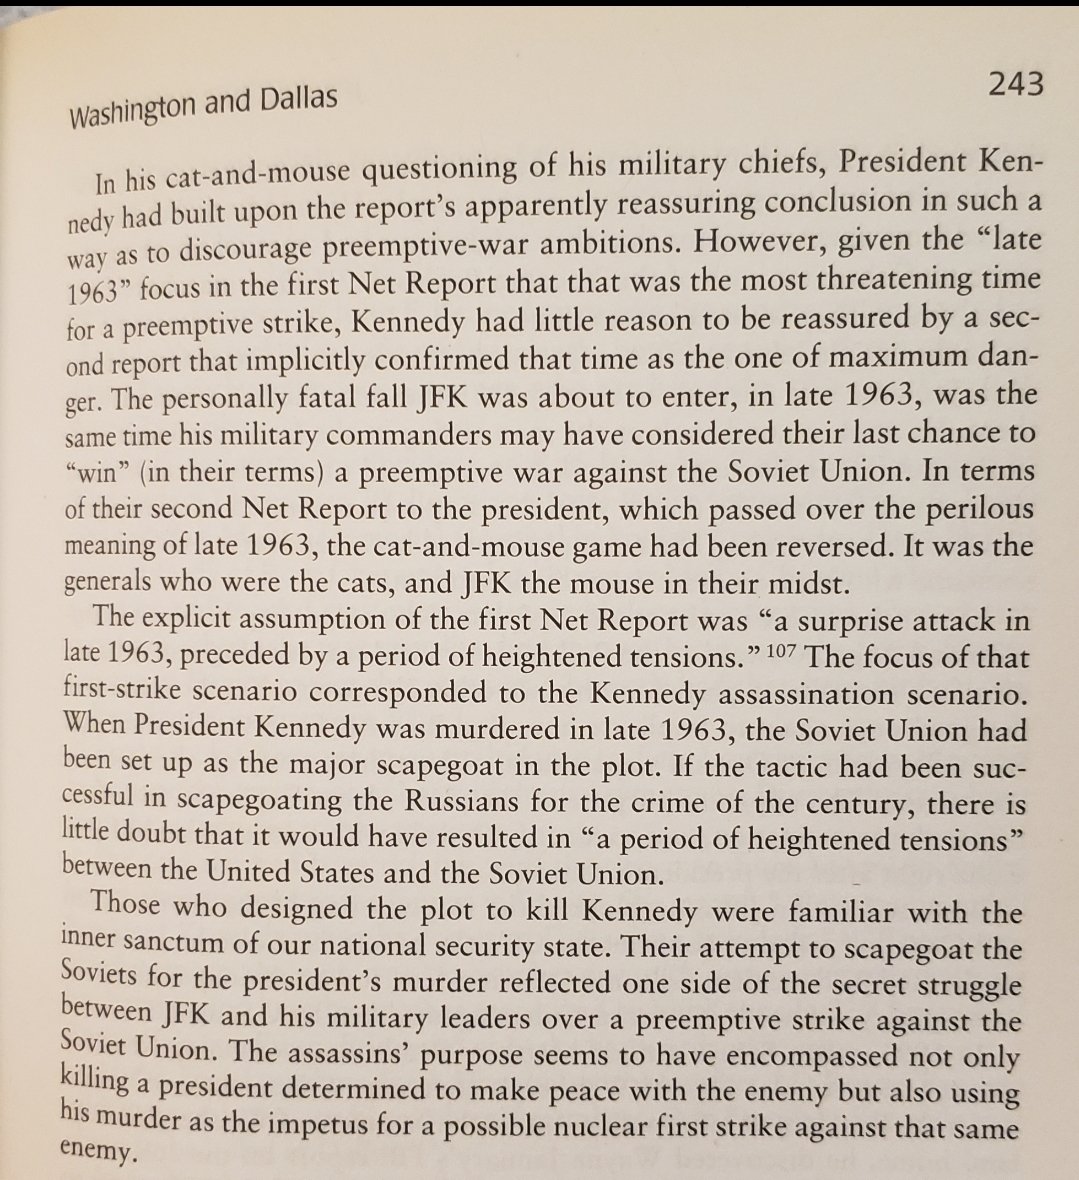 So here's an interesting theory as to why Kennedy was killed when he was - the military (represented by Joint Chiefs) believed their "first-strike nuclear advantage" would be up by the end of 1963. A president interested in detente with Khrushchev was a waste of that opportunity: